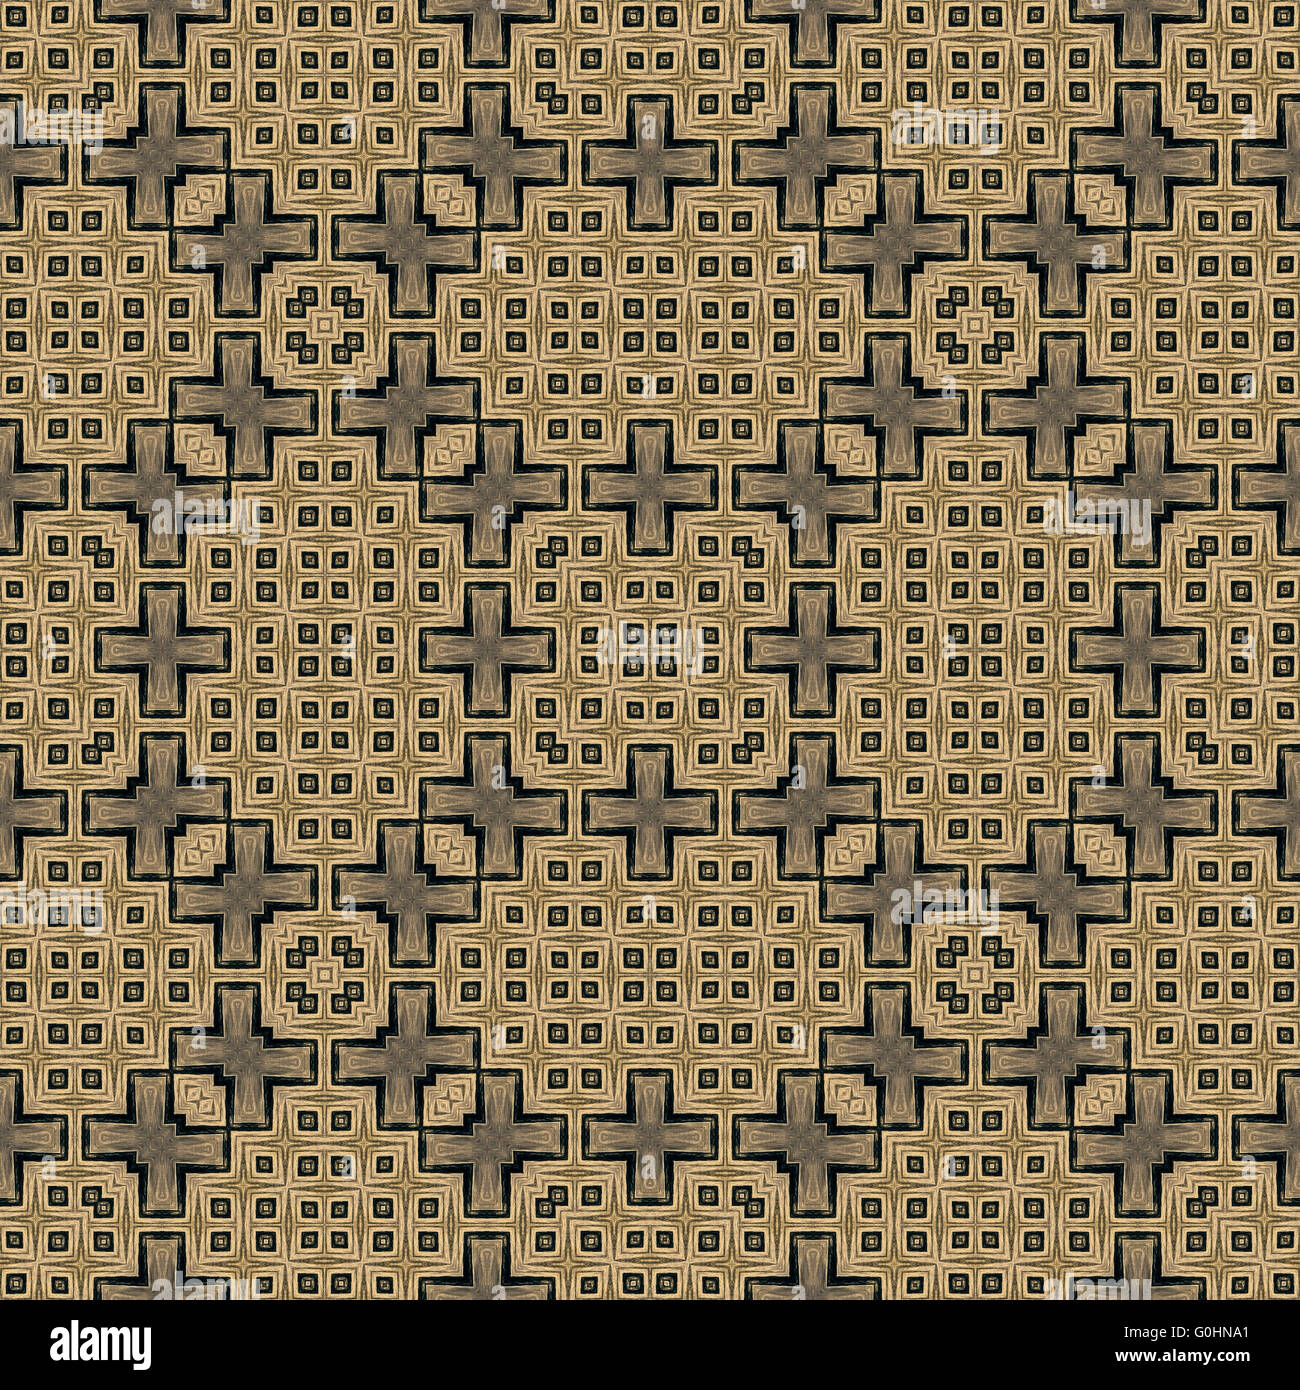 Seamless kaleidoscopic wallpaper tiles pattern drawn with black soft pencil based on wooden texture Stock Photo